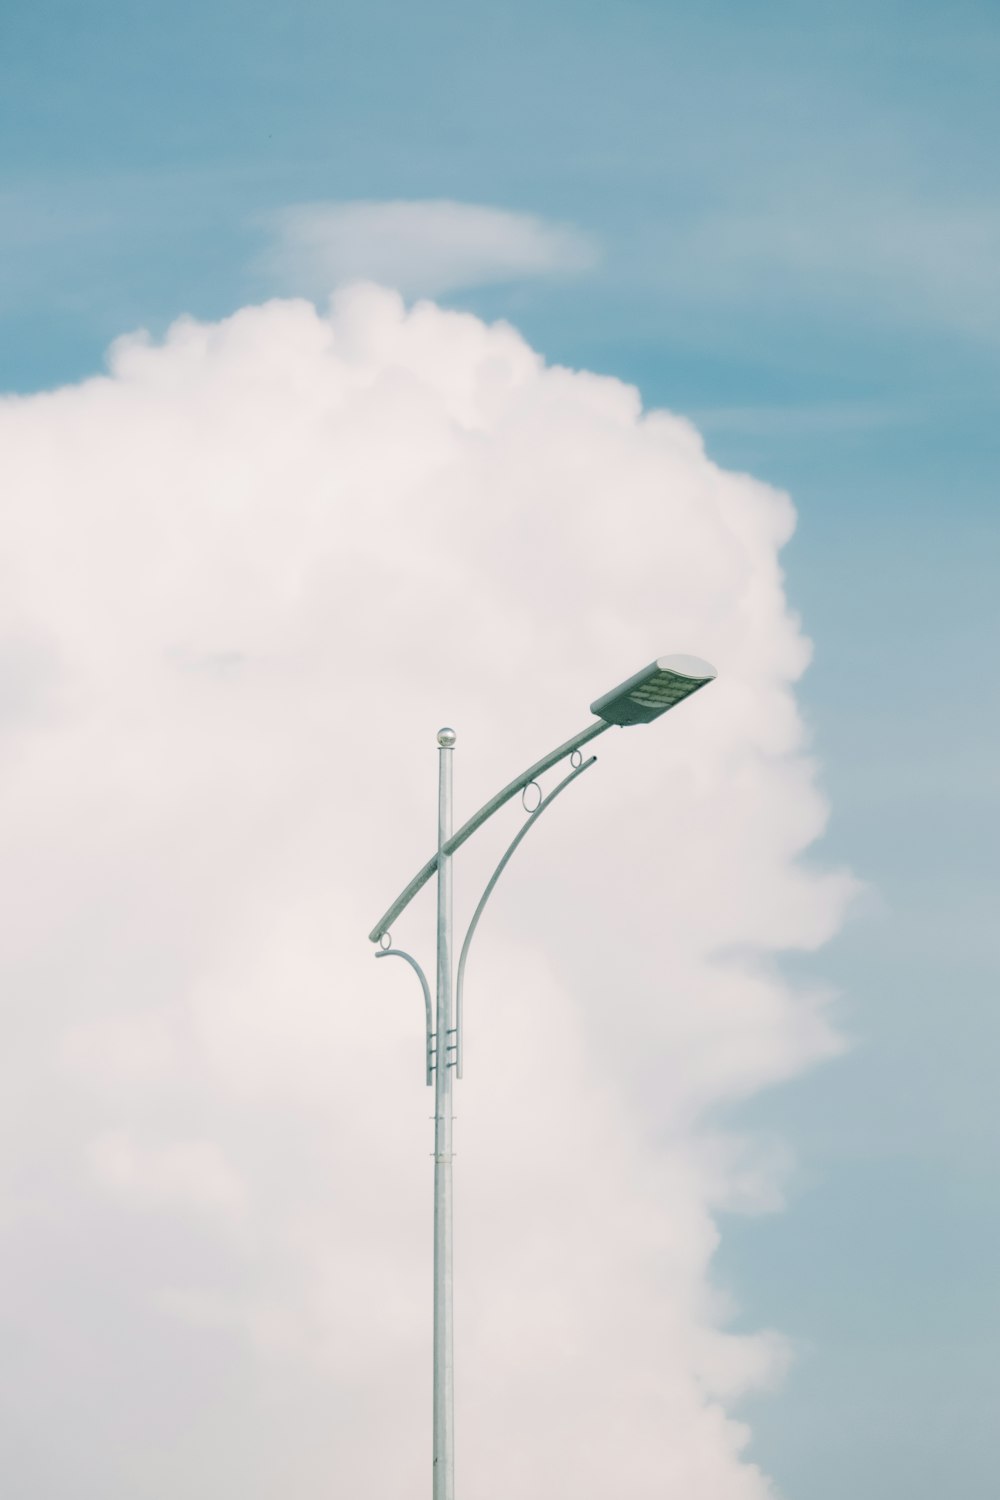 a street light with a cloud in the background